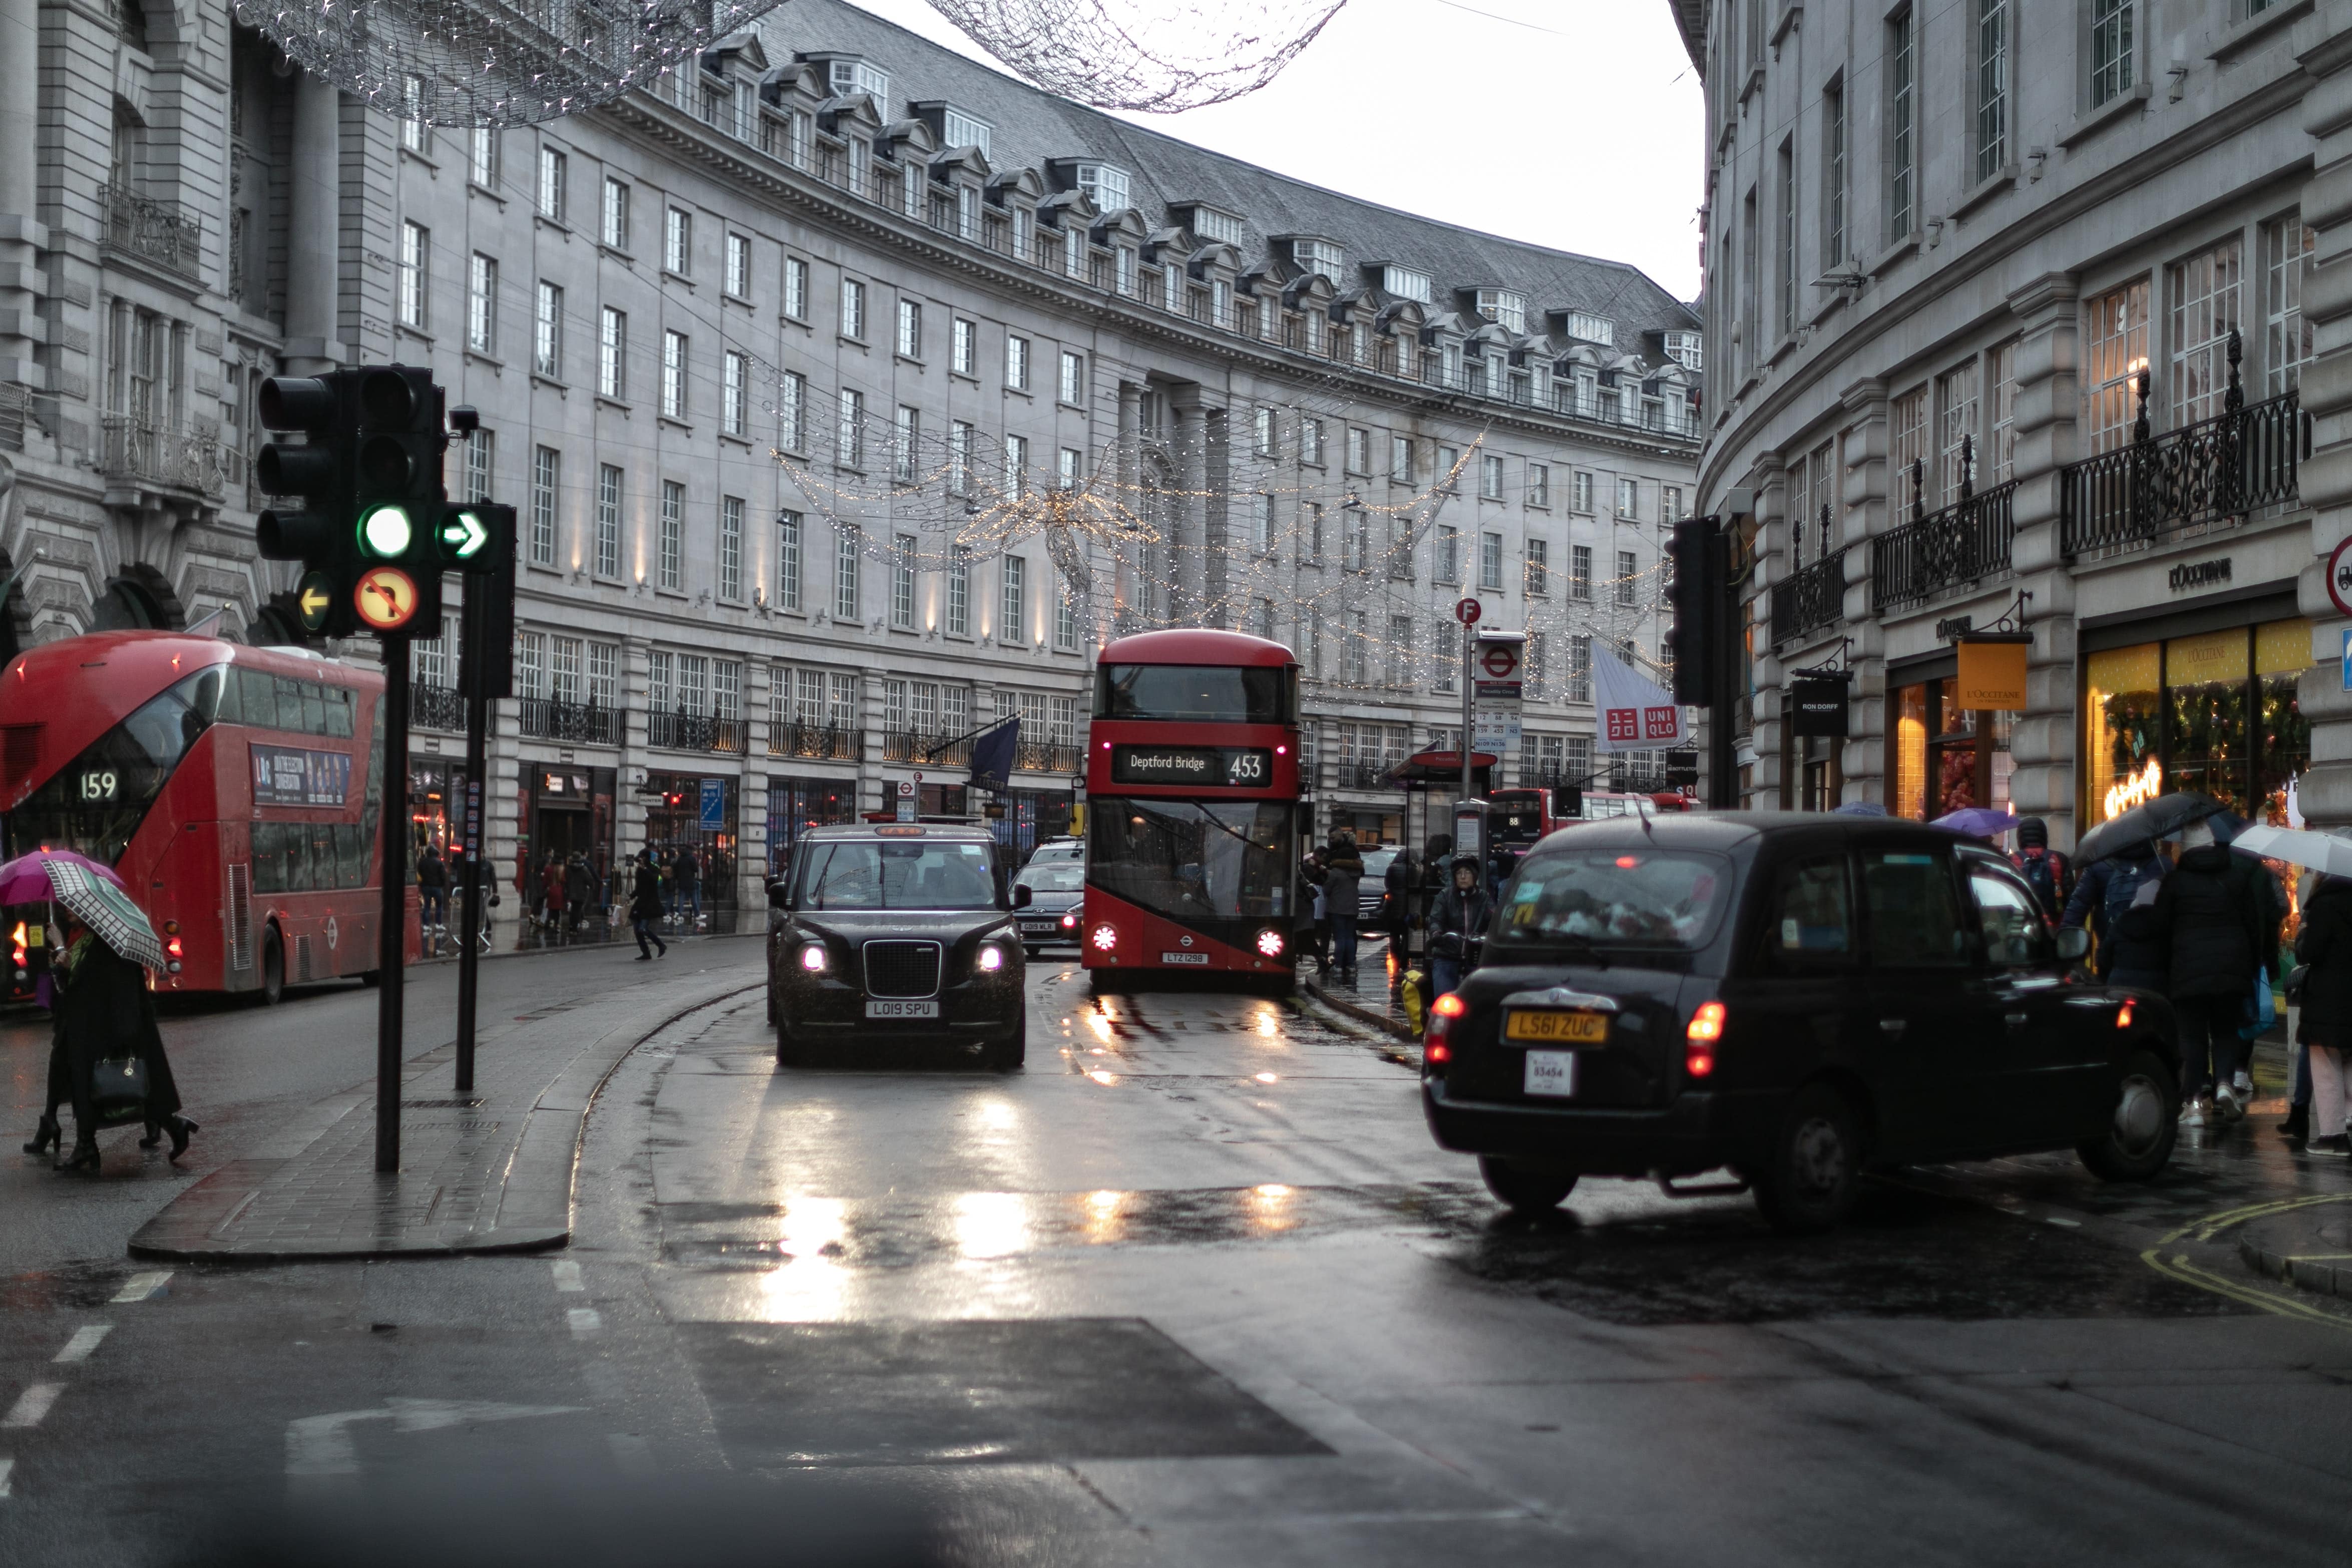 photo-of-buses-and-taxis-on-a-street-in-london-on-a-rainy-day